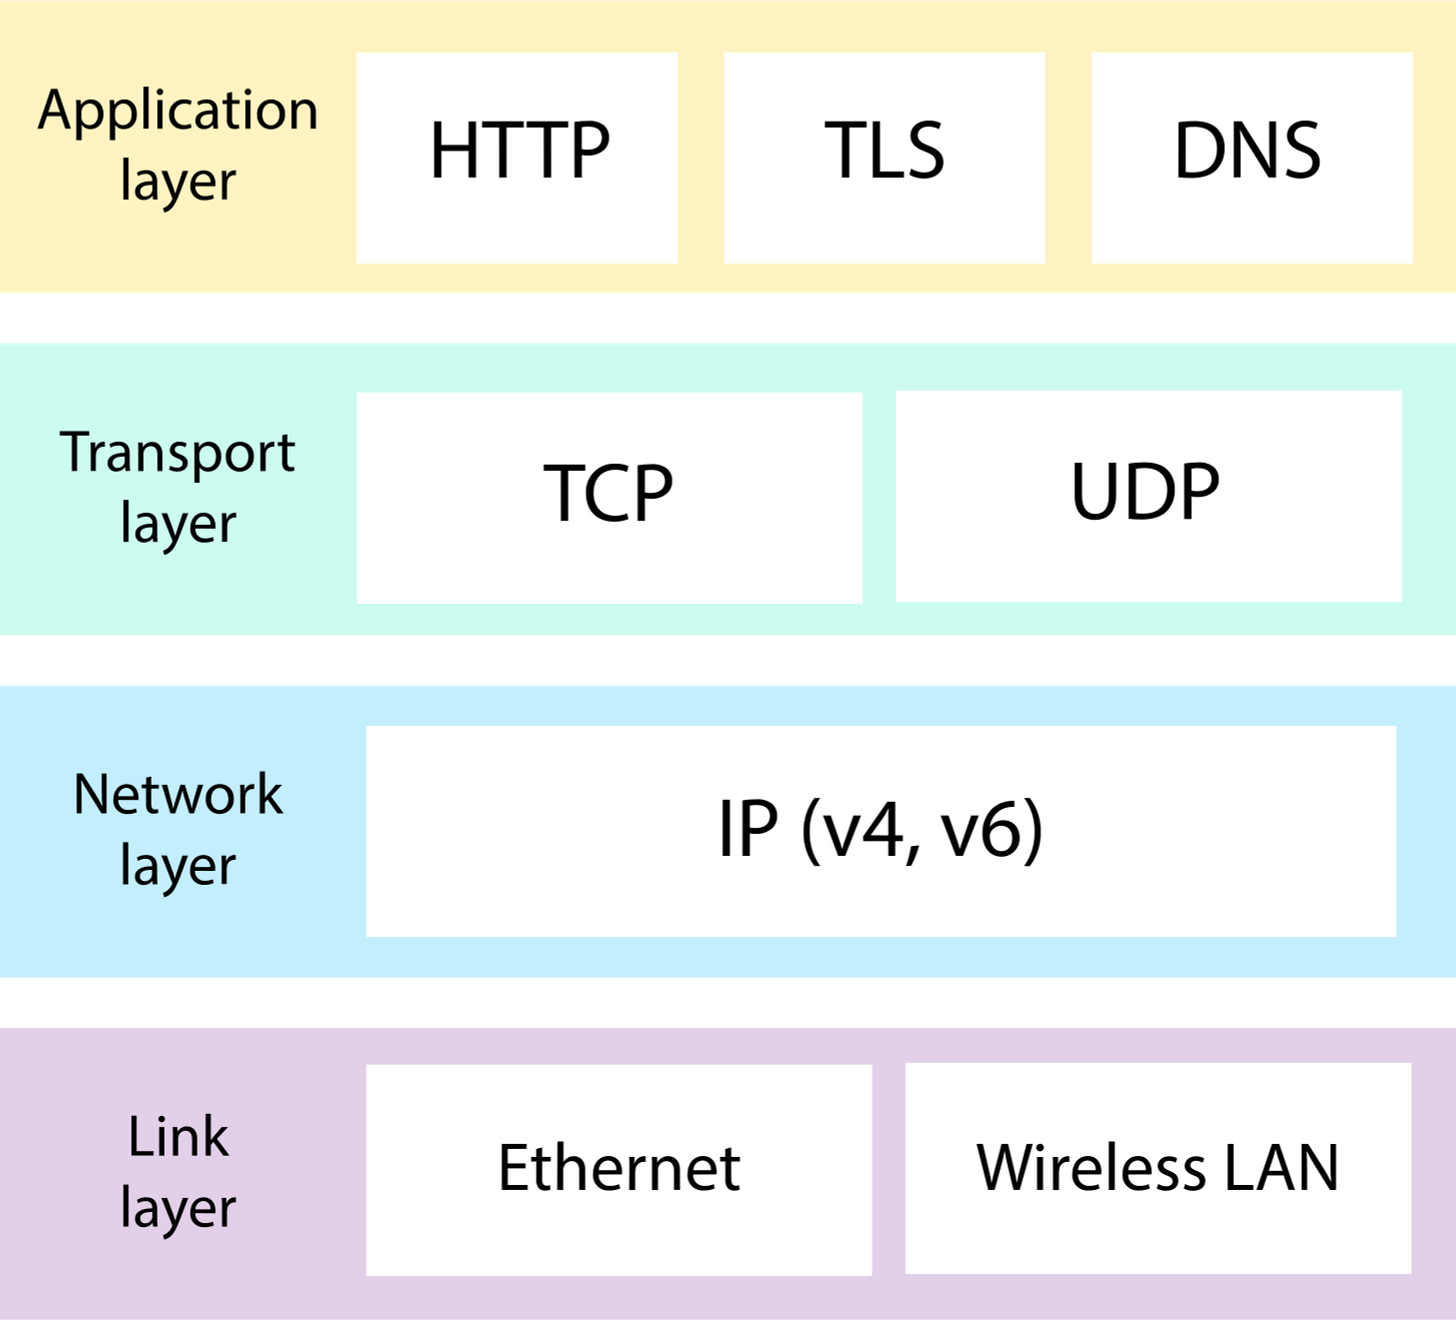 A diagram of the Internet protocols suite with four layers. From top to bottom:

* Application layer: includes boxes for HTTP, DNS, and TLS.
* Transport layer: includes boxes for TCP & UDP.
* Network layer: includes a single box for IP (v4 and v6).
* Link layer: includes boxes for Ethernet & Wireless LAN.